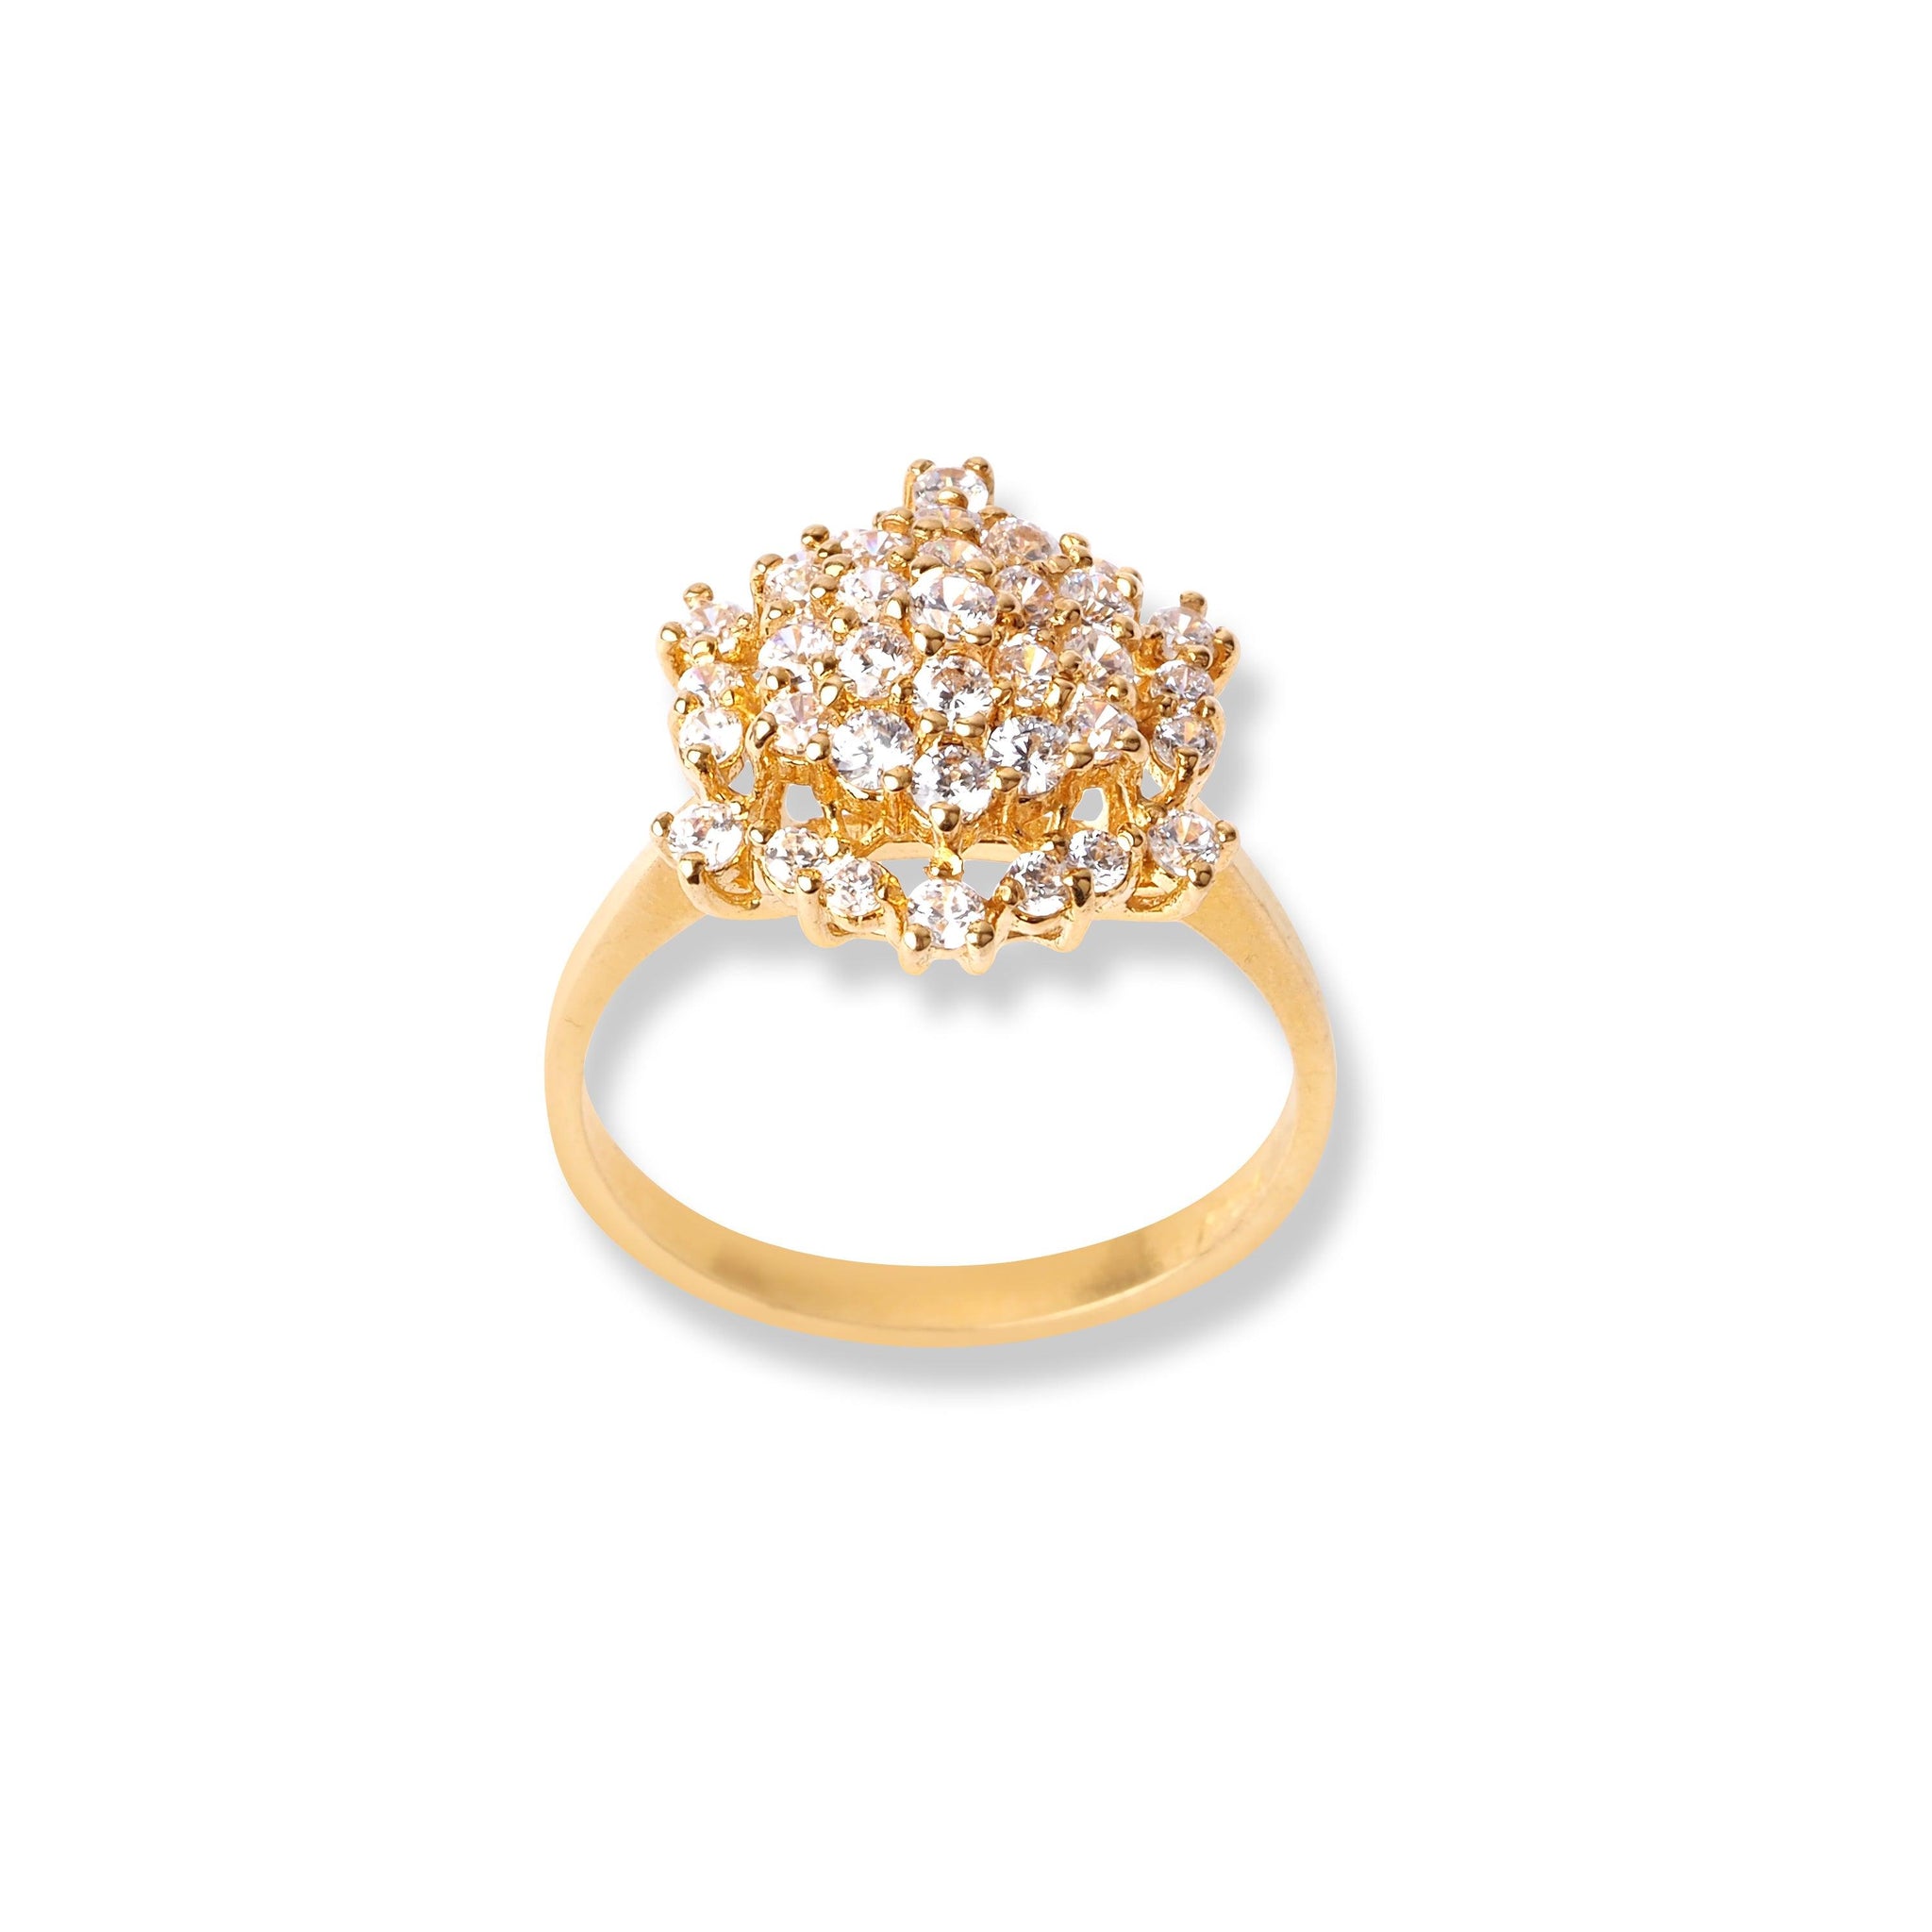 22ct Gold Ring With Cubic Zirconia Stones (4.3g) LR-6586